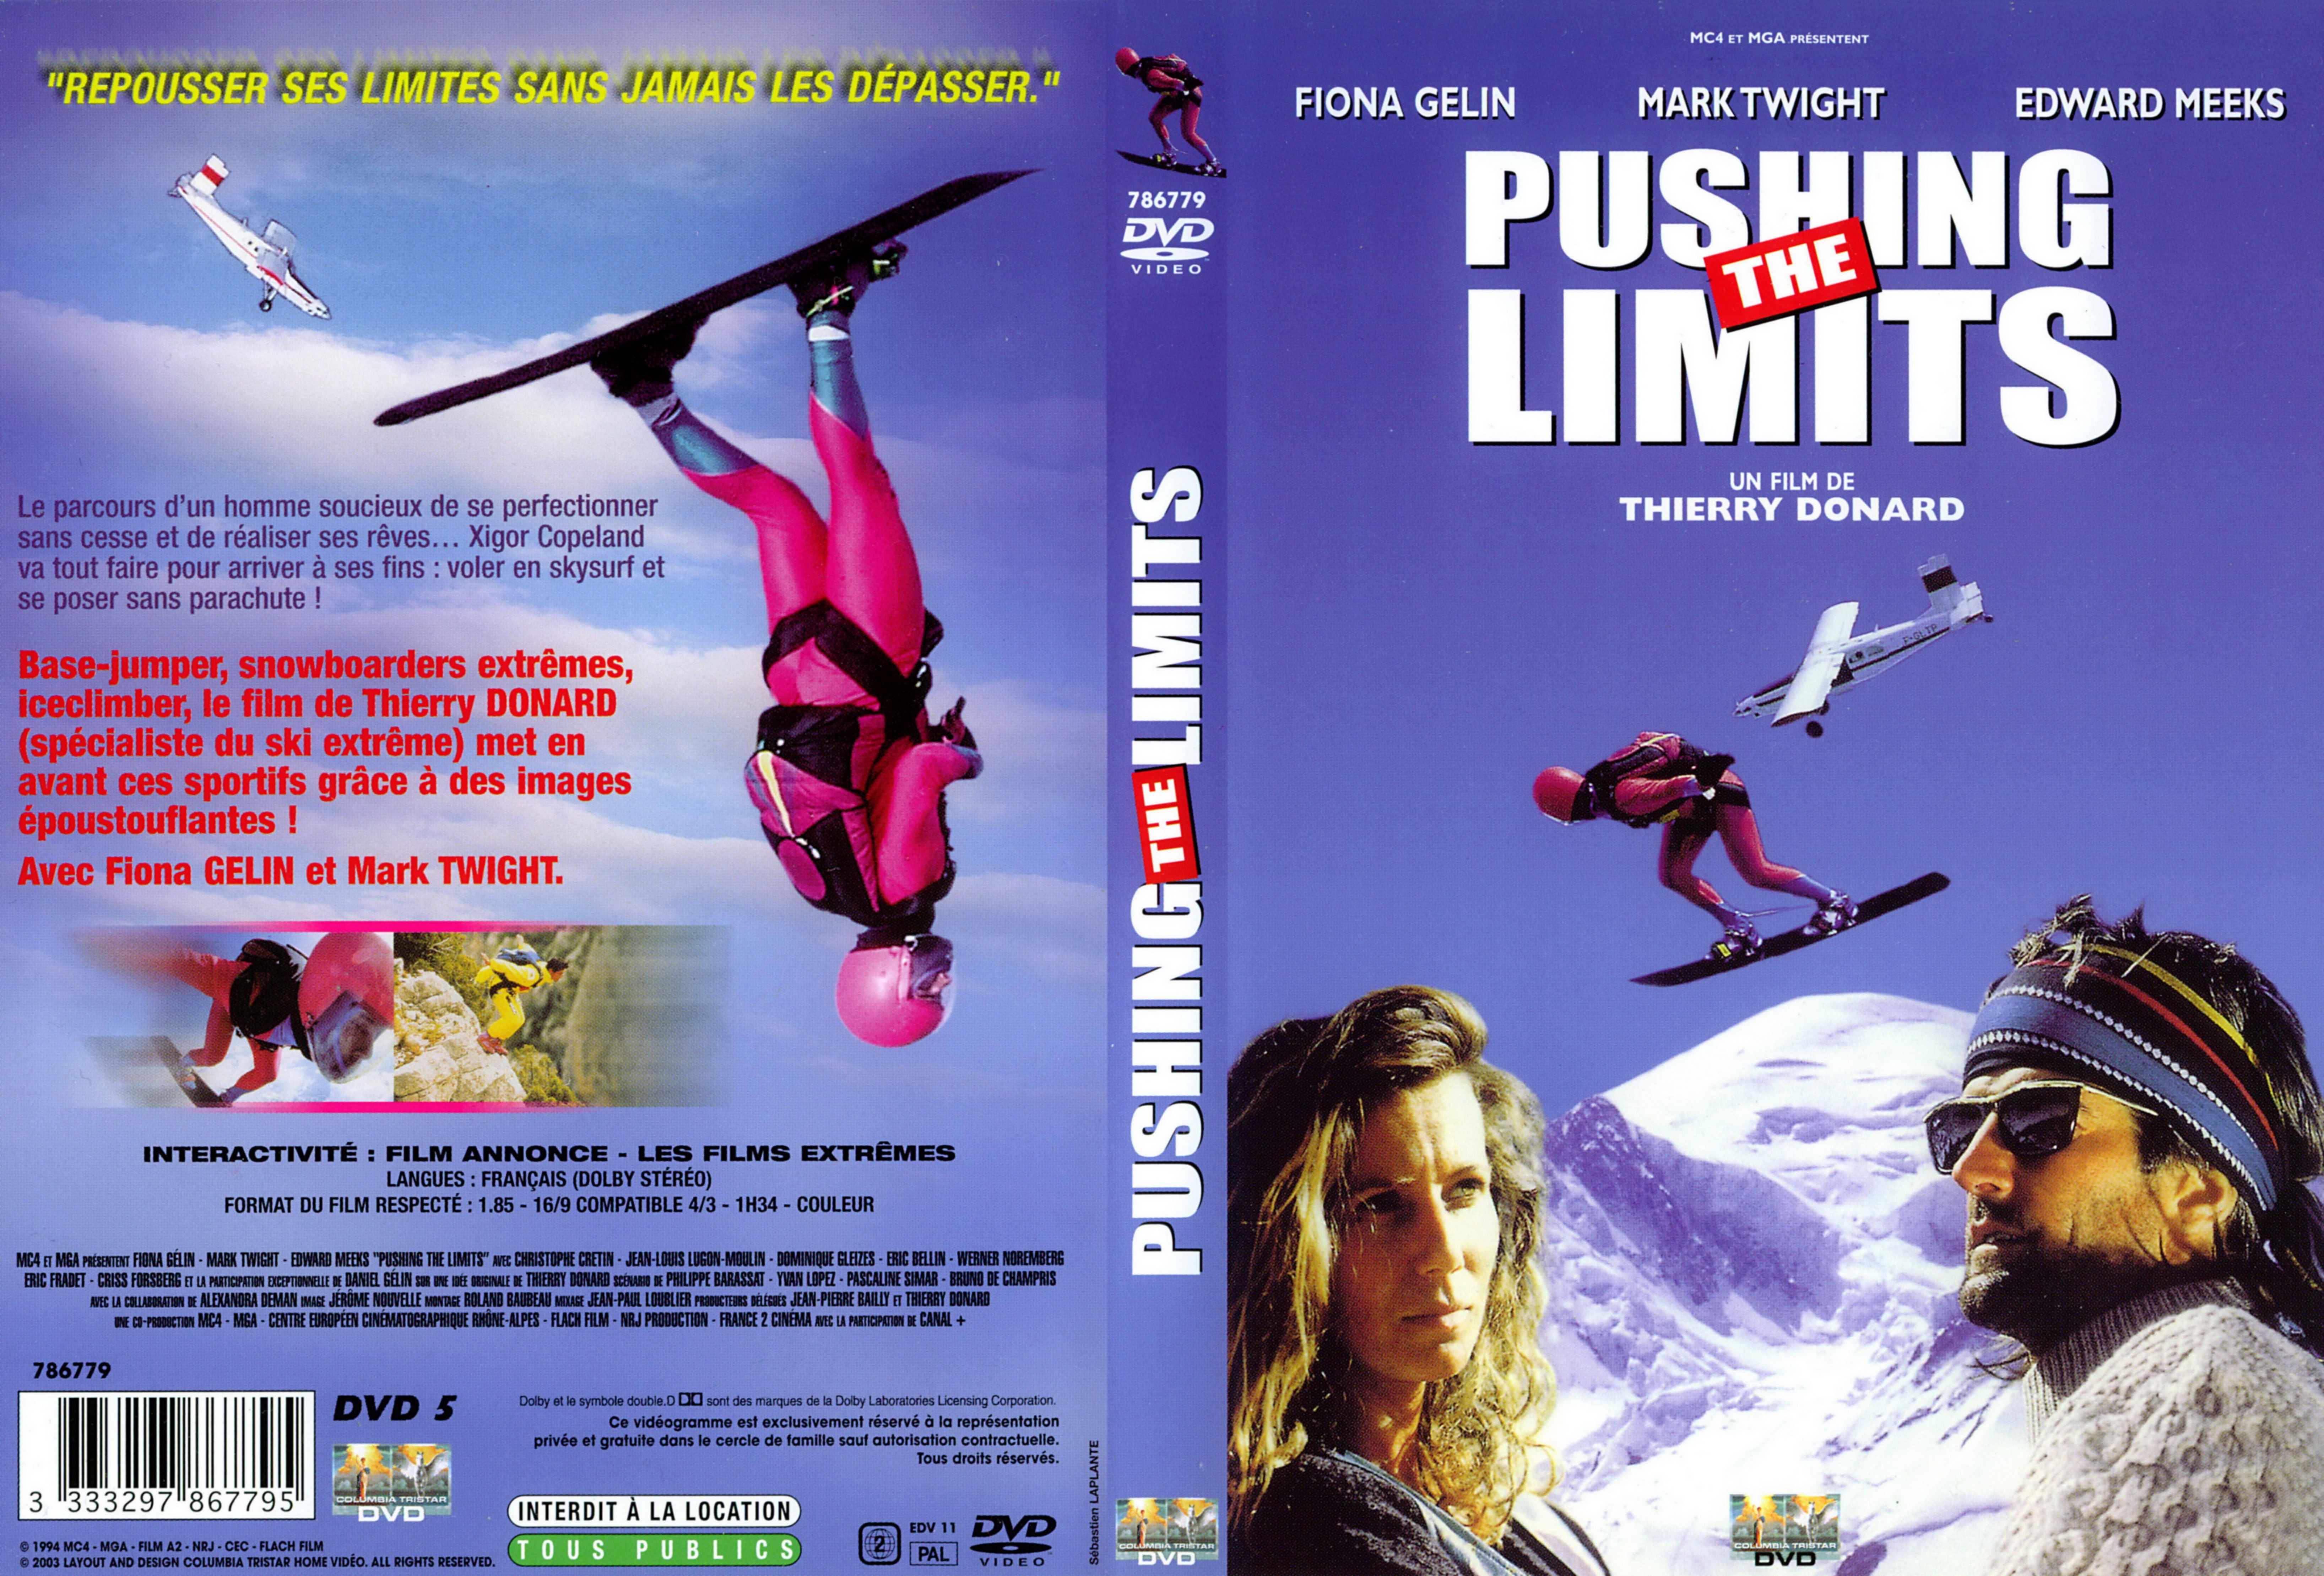 Jaquette DVD Pushing the limits